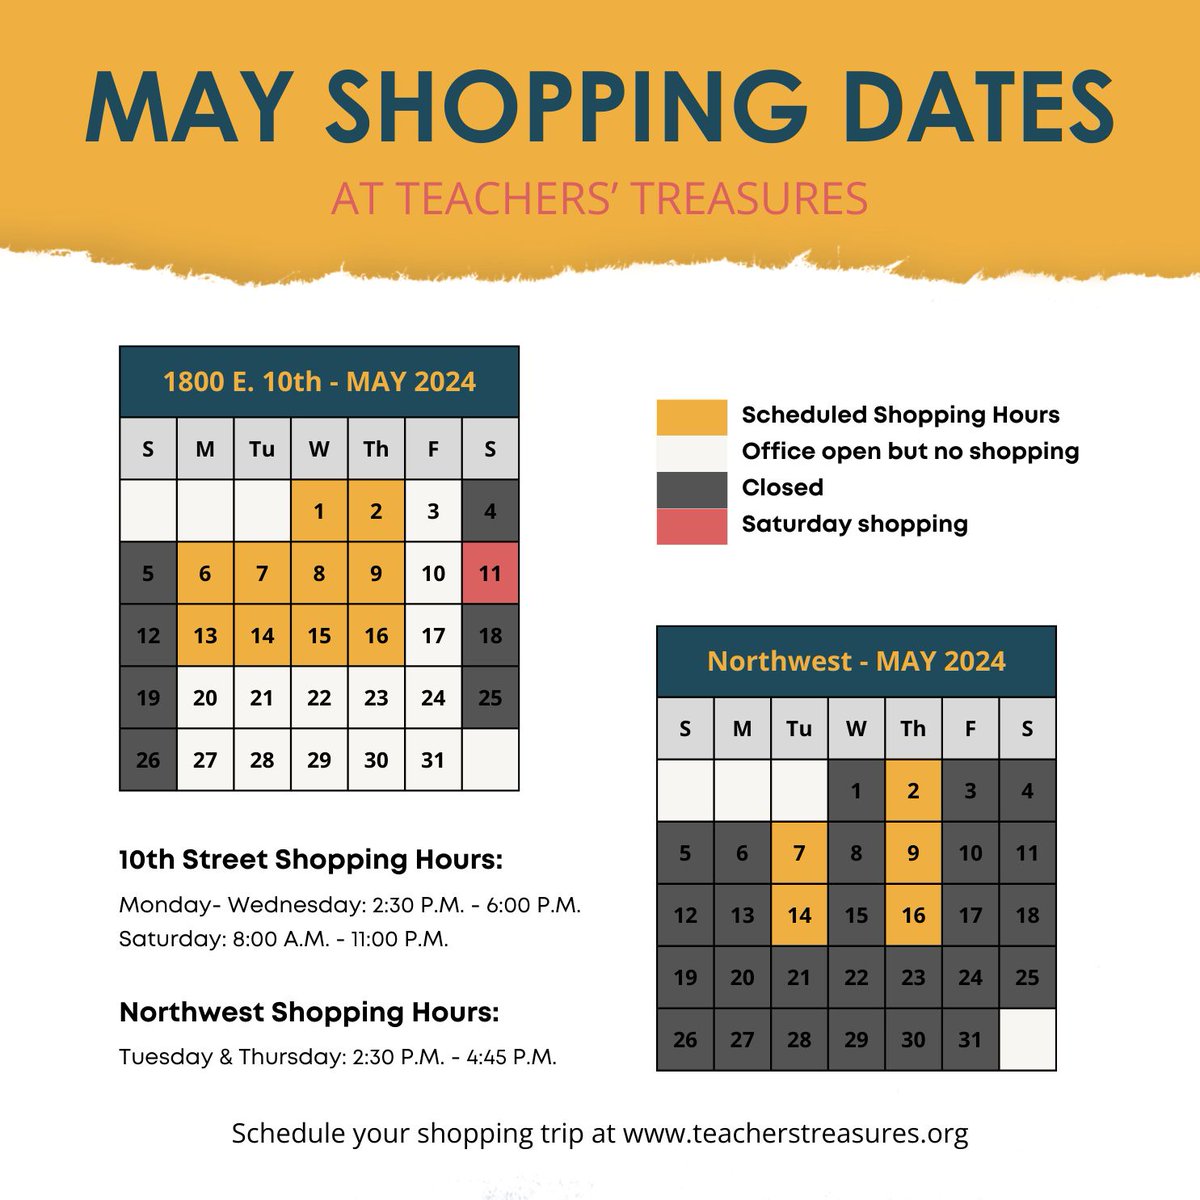 Tomorrow is the last month of shopping for the 2023-2024 school year! Teachers, make sure to schedule your appointment ASAP. Review the calendar and use the link below to get scheduled! buff.ly/3M8x8V2